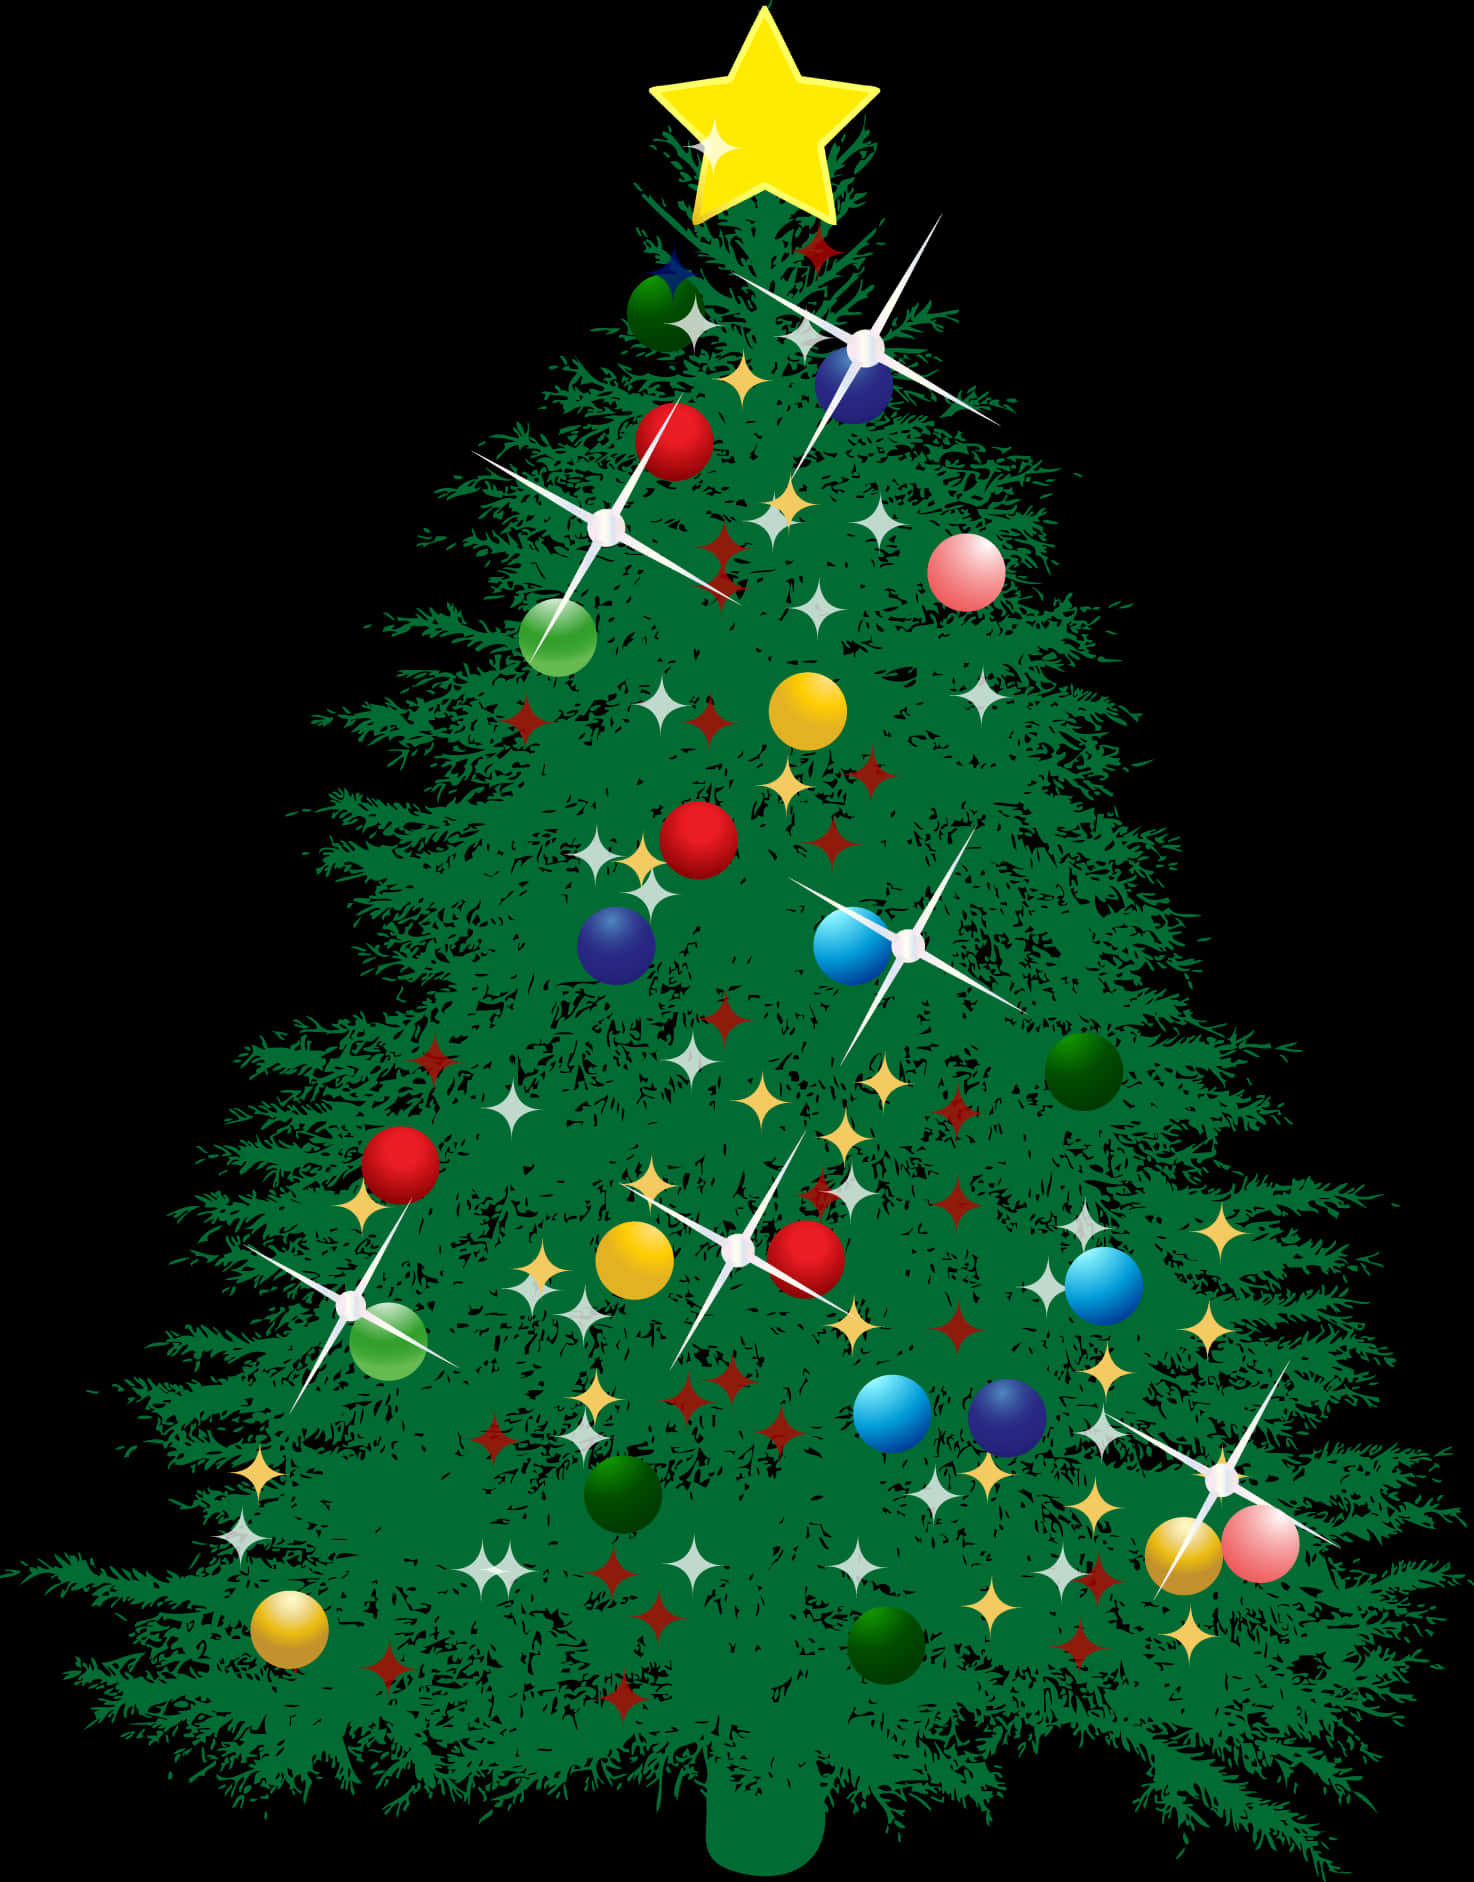 A Christmas Tree With Ornaments And Stars